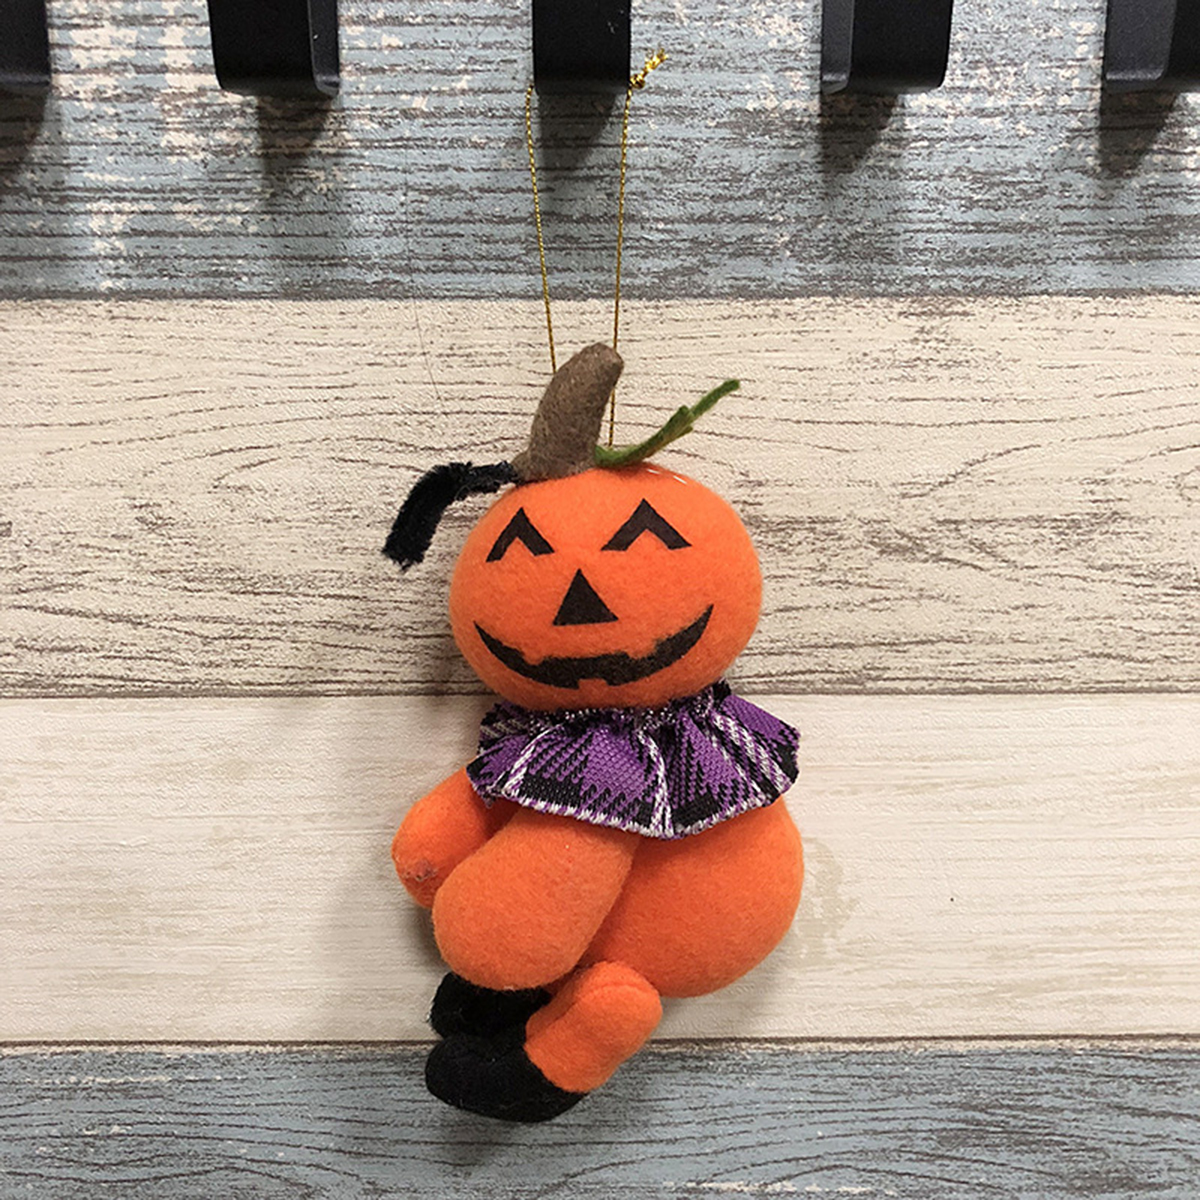 Halloween-Pumpkin-Cat-Ghost-Doll-Cloth-Plush-Toy-Club-Home-Exquisite-Decor-Gift-1342802-4